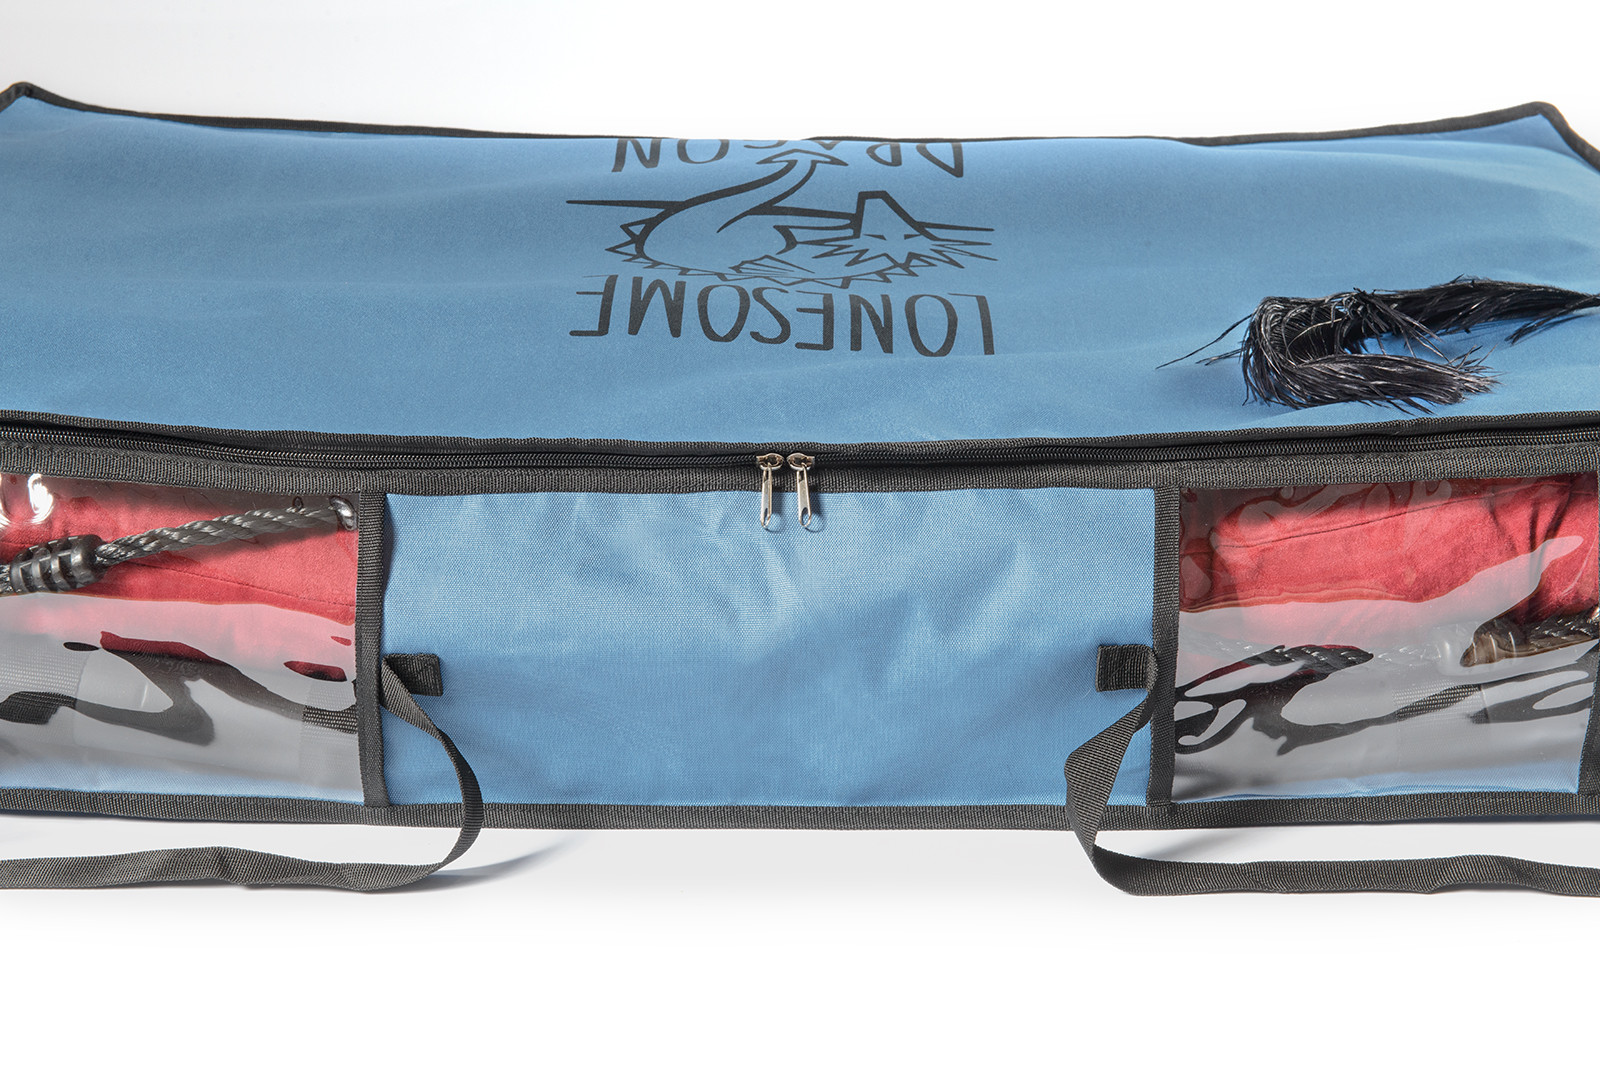 Carrying and storage bag for sexswing